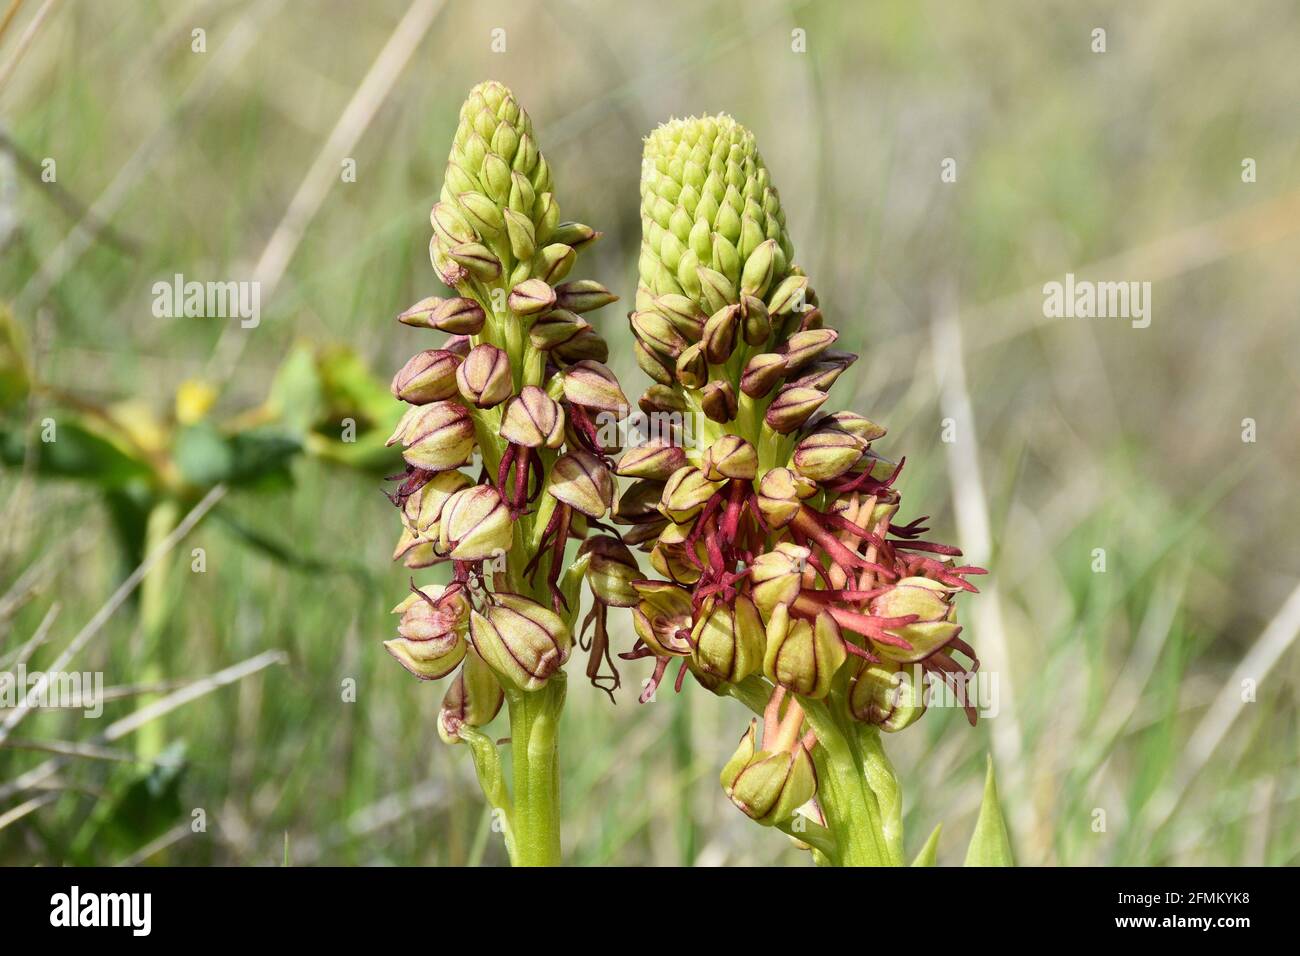 Hanged Man Flower Orchid (Orchis anthropophora). Flowers shaped like the body of a person. Located in Munilla, La Rioja, Spain. Stock Photo